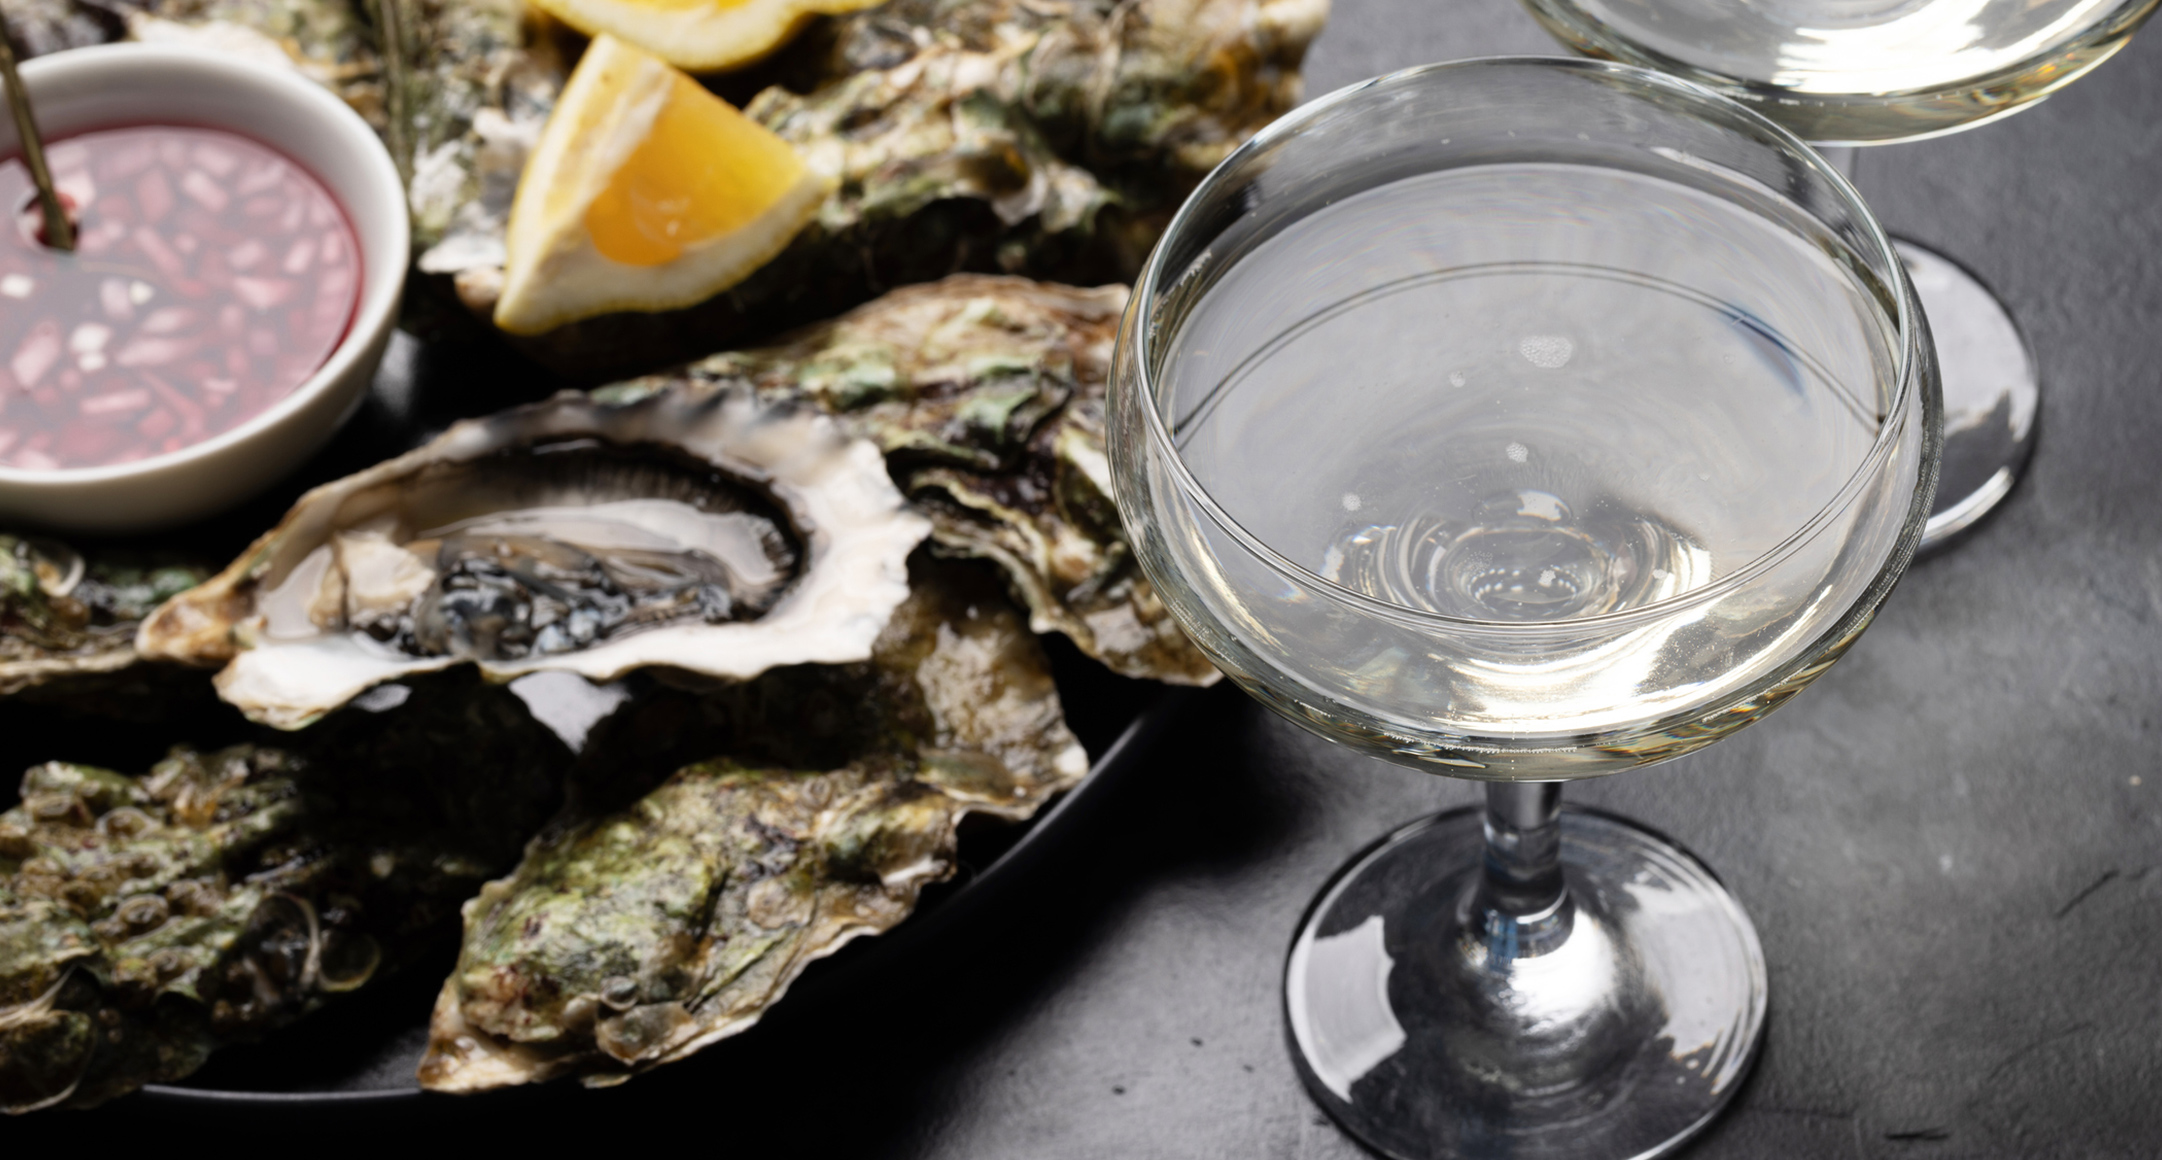 A bottle of prosecco alongside a tray of freshly shucked oysters.